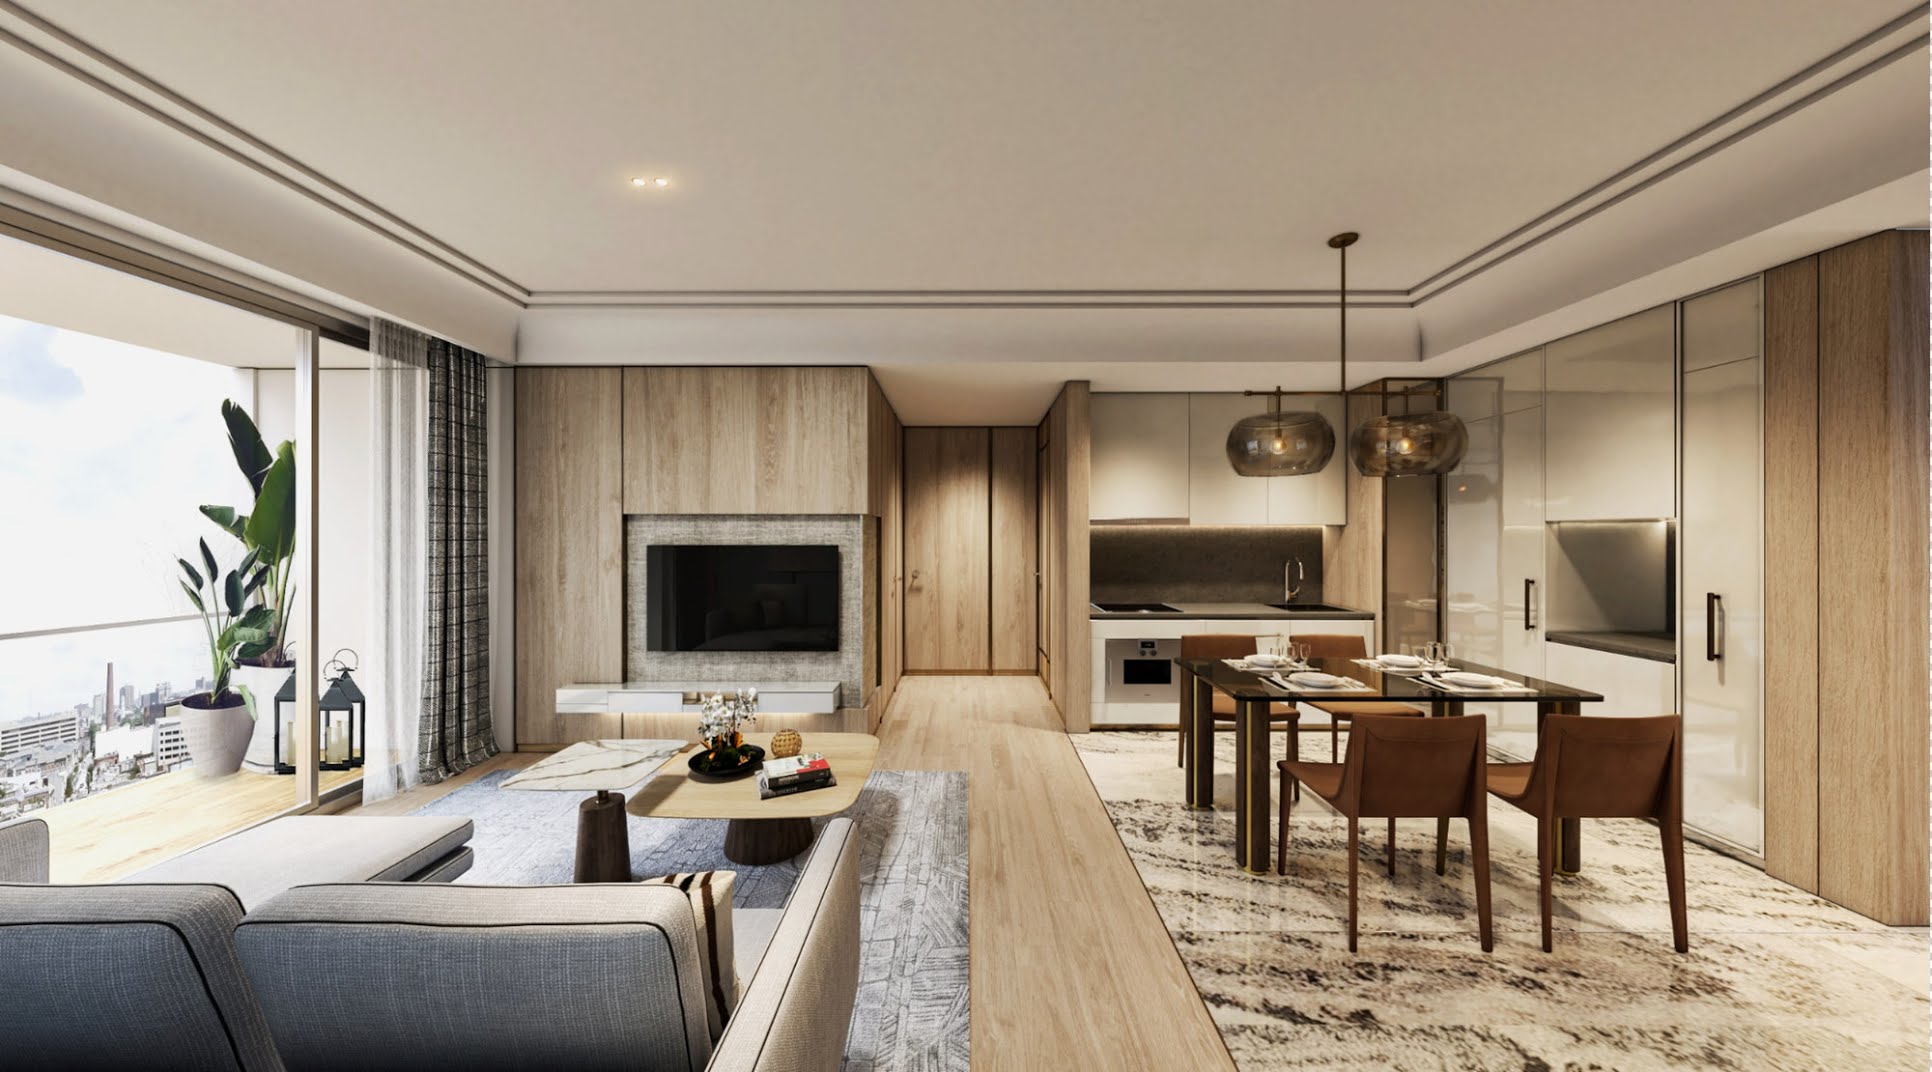 Masterise Homes, the developer of Grand Marina, Saigon, is offering 72 units in the first tower at prices starting from US$888,000, according to Asia Bankers Club, which is marketing the property to its members. Photo: Handout